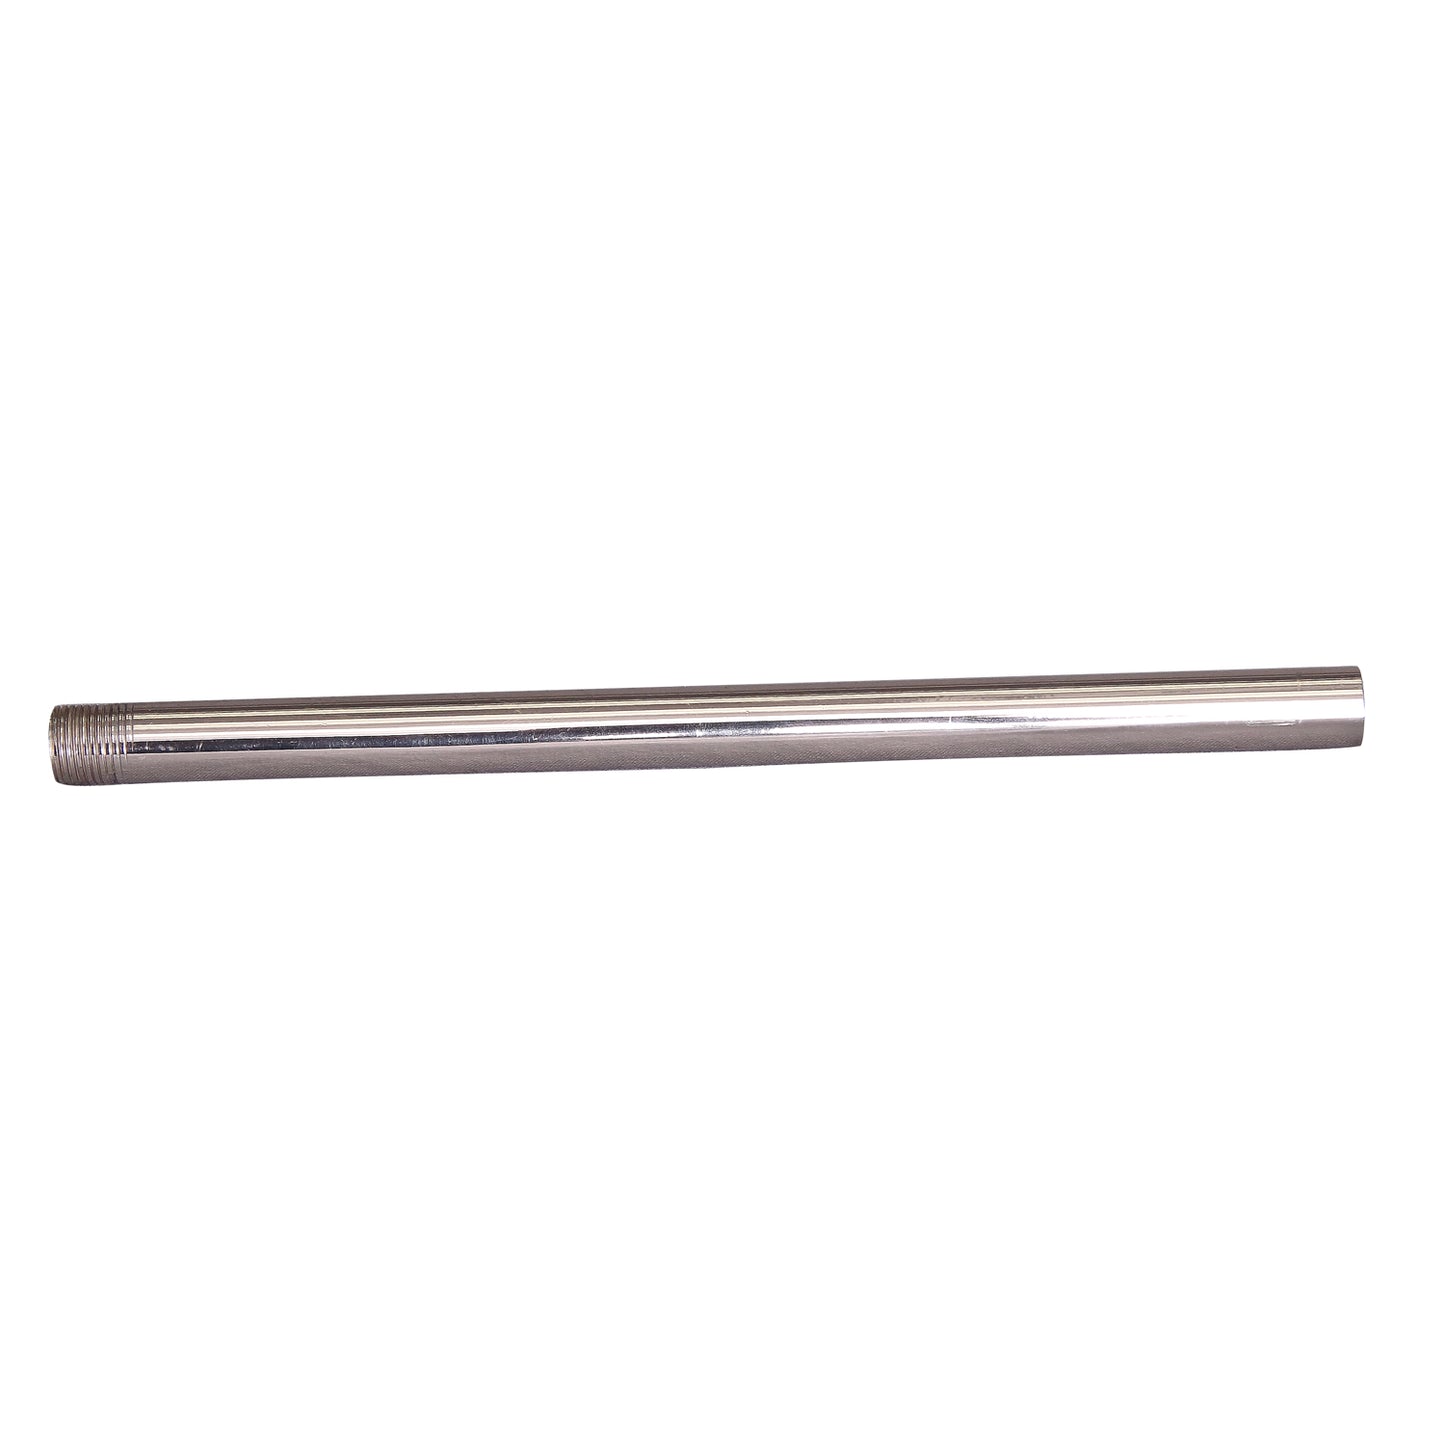 Barclay Wall Support for 4152 Rod 18" Polished Nickel